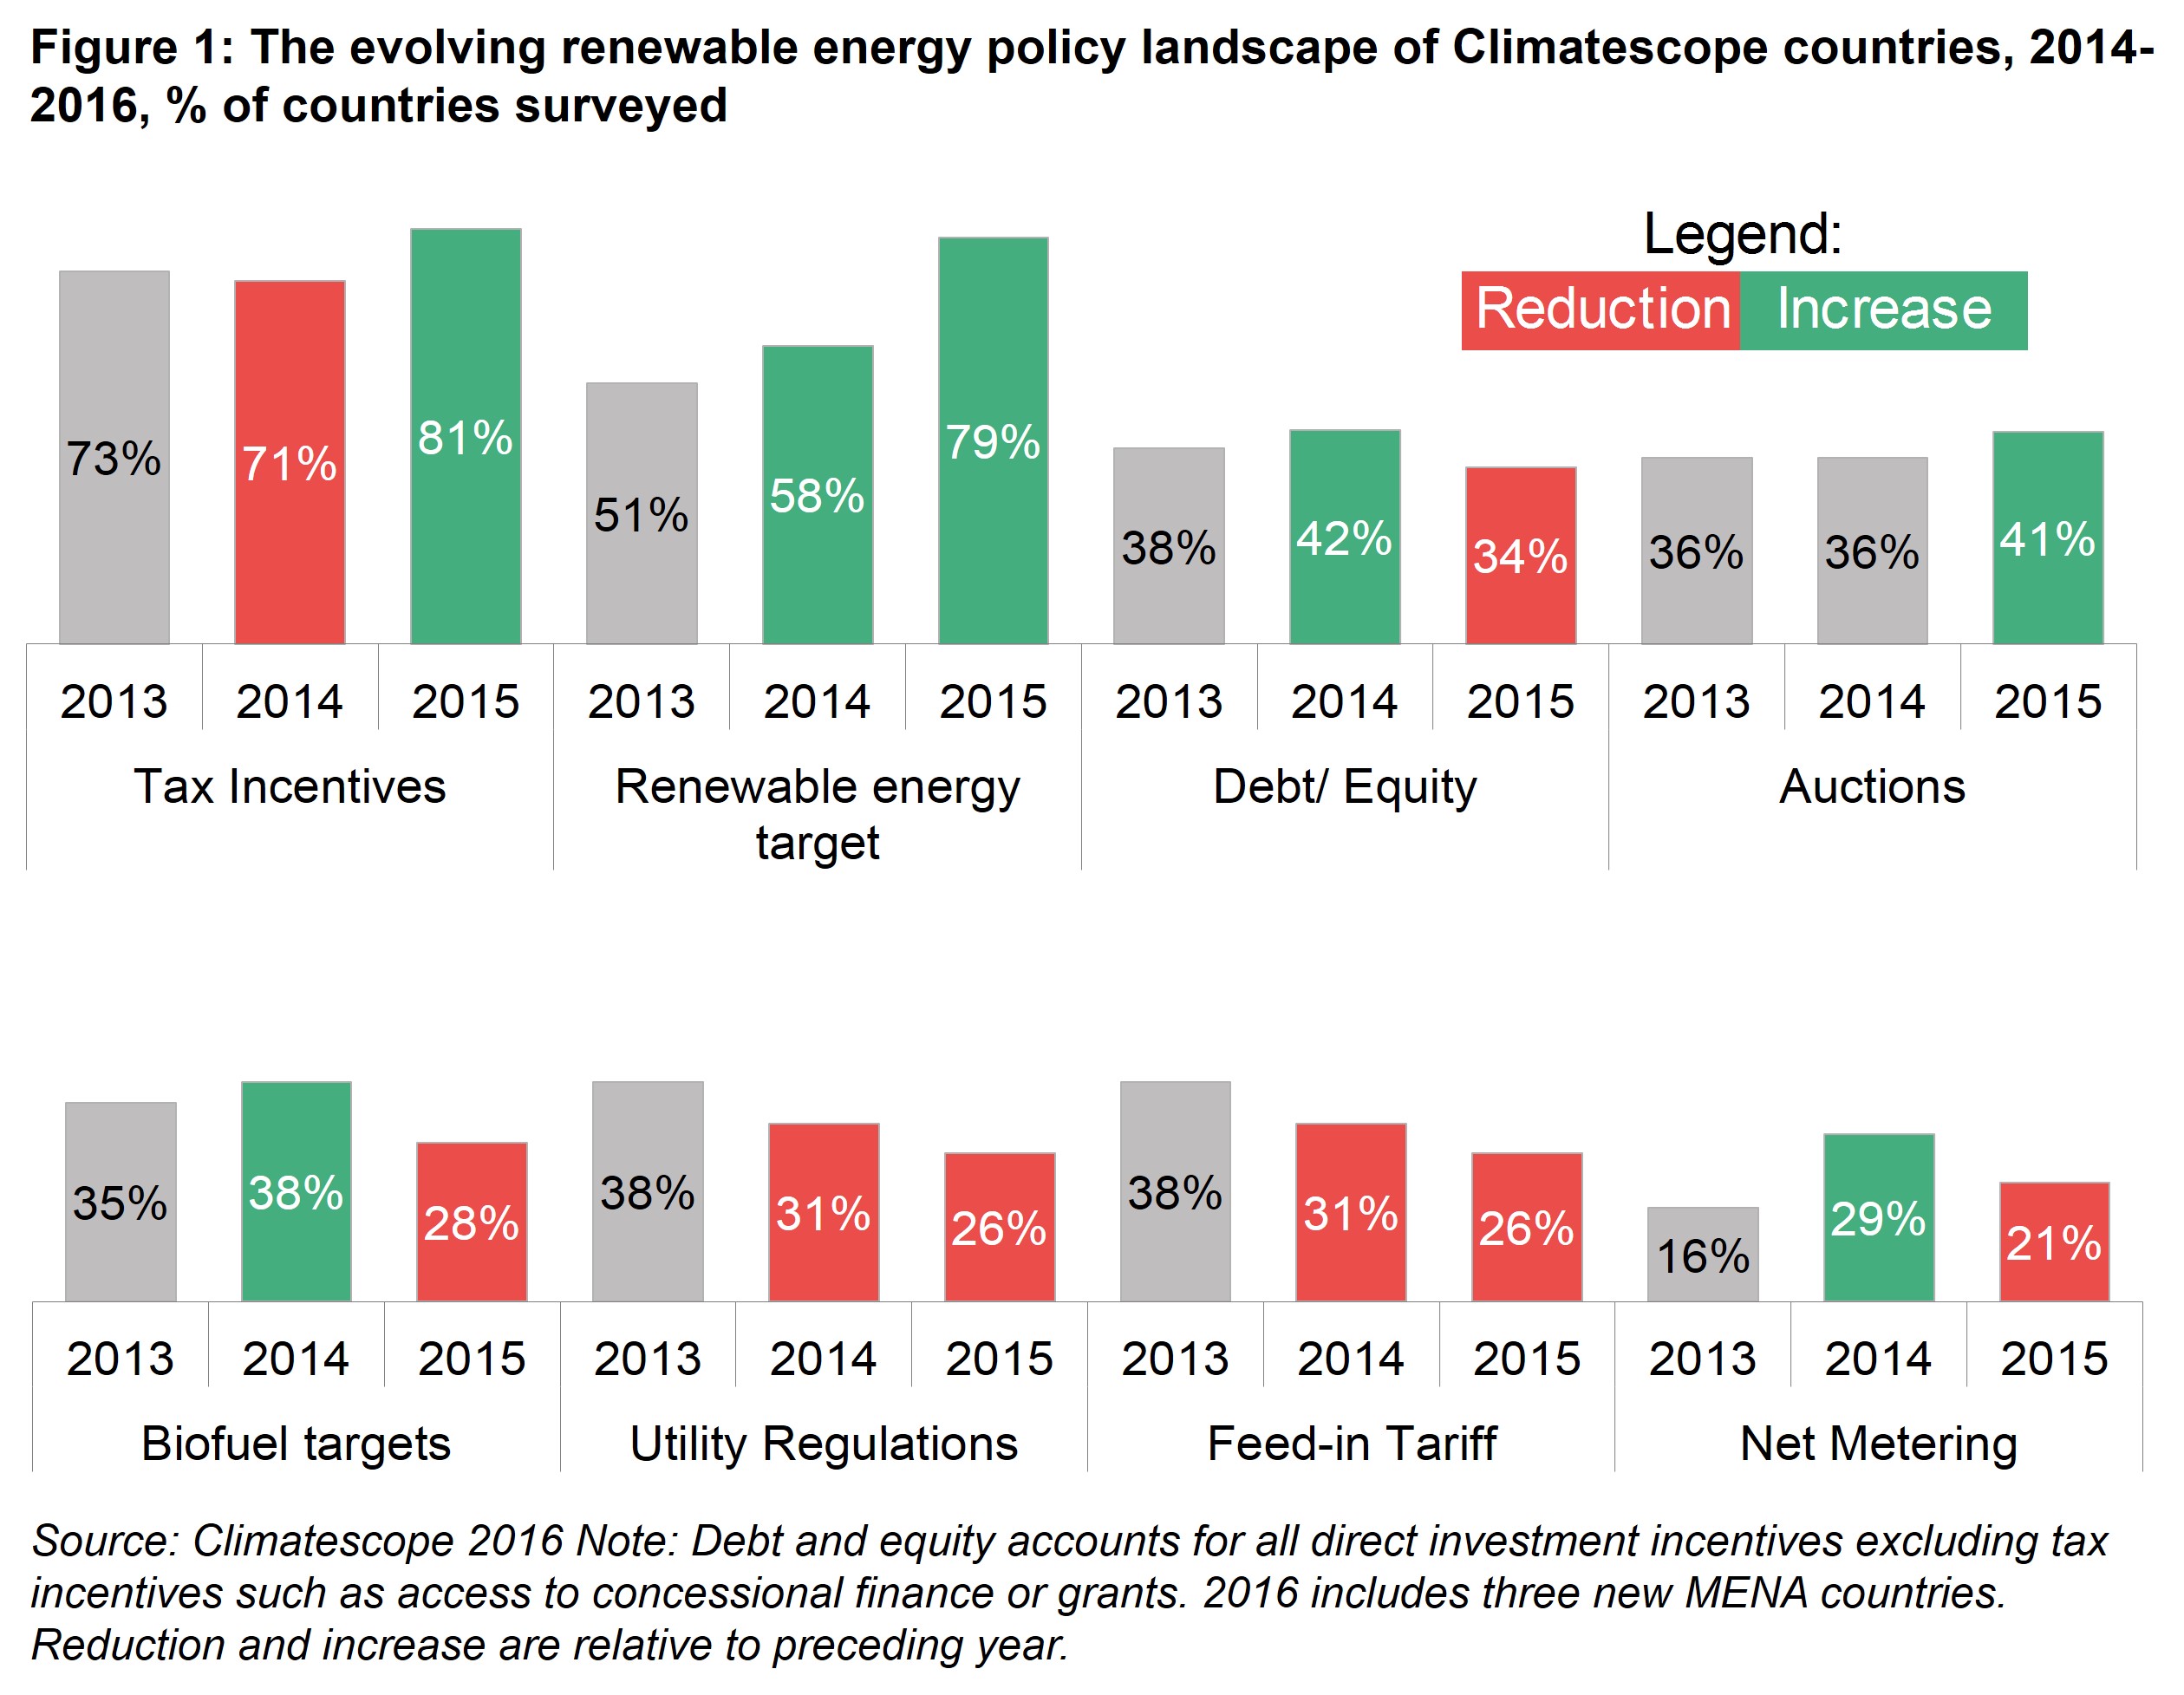 PI Fig 1 - The evolving policy landscape of Climatescope countries, 2014-2016, % of countries surveyed